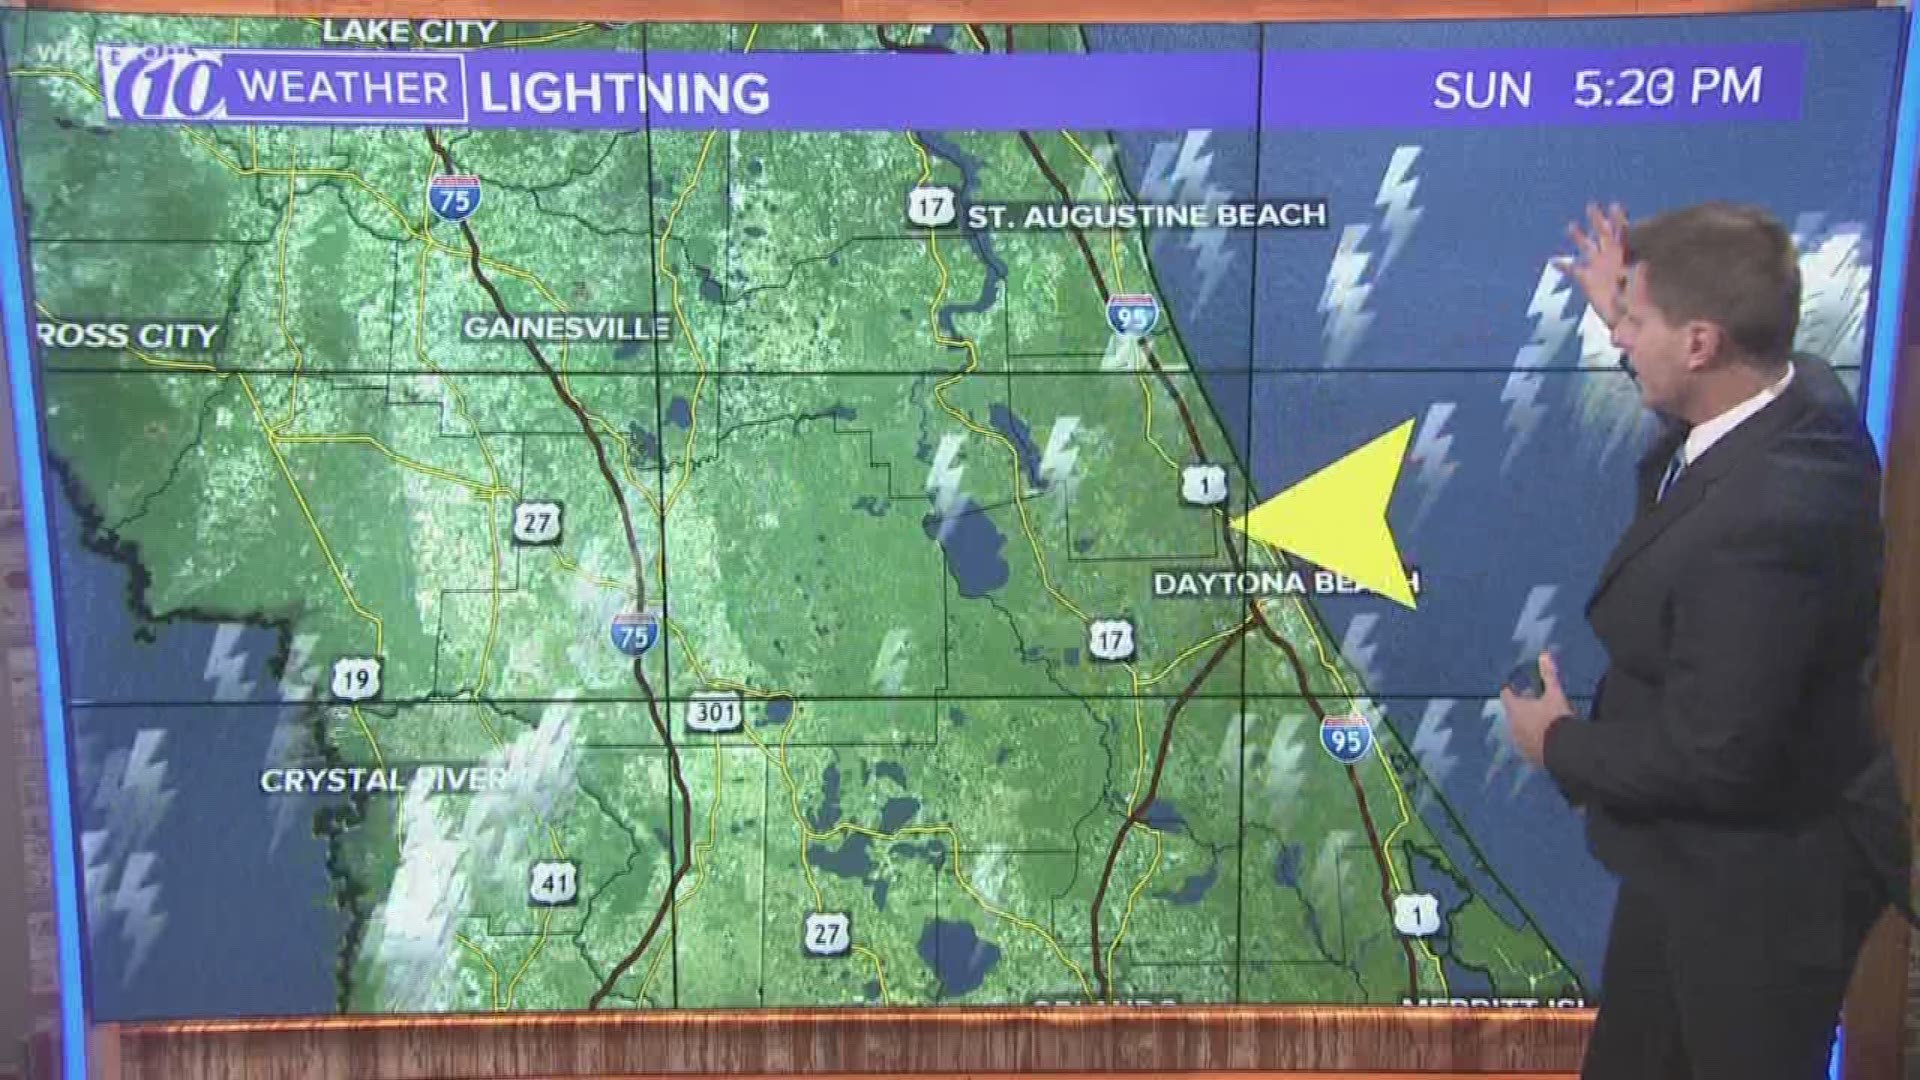 A motorcyclist was struck by lightning and killed Sunday in Ormond Beach, according to CBS affiliate WKMG.

The motorcyclist was heading south on Interstate 95 when witnesses said a bolt struck their helmet, WKMG reported.